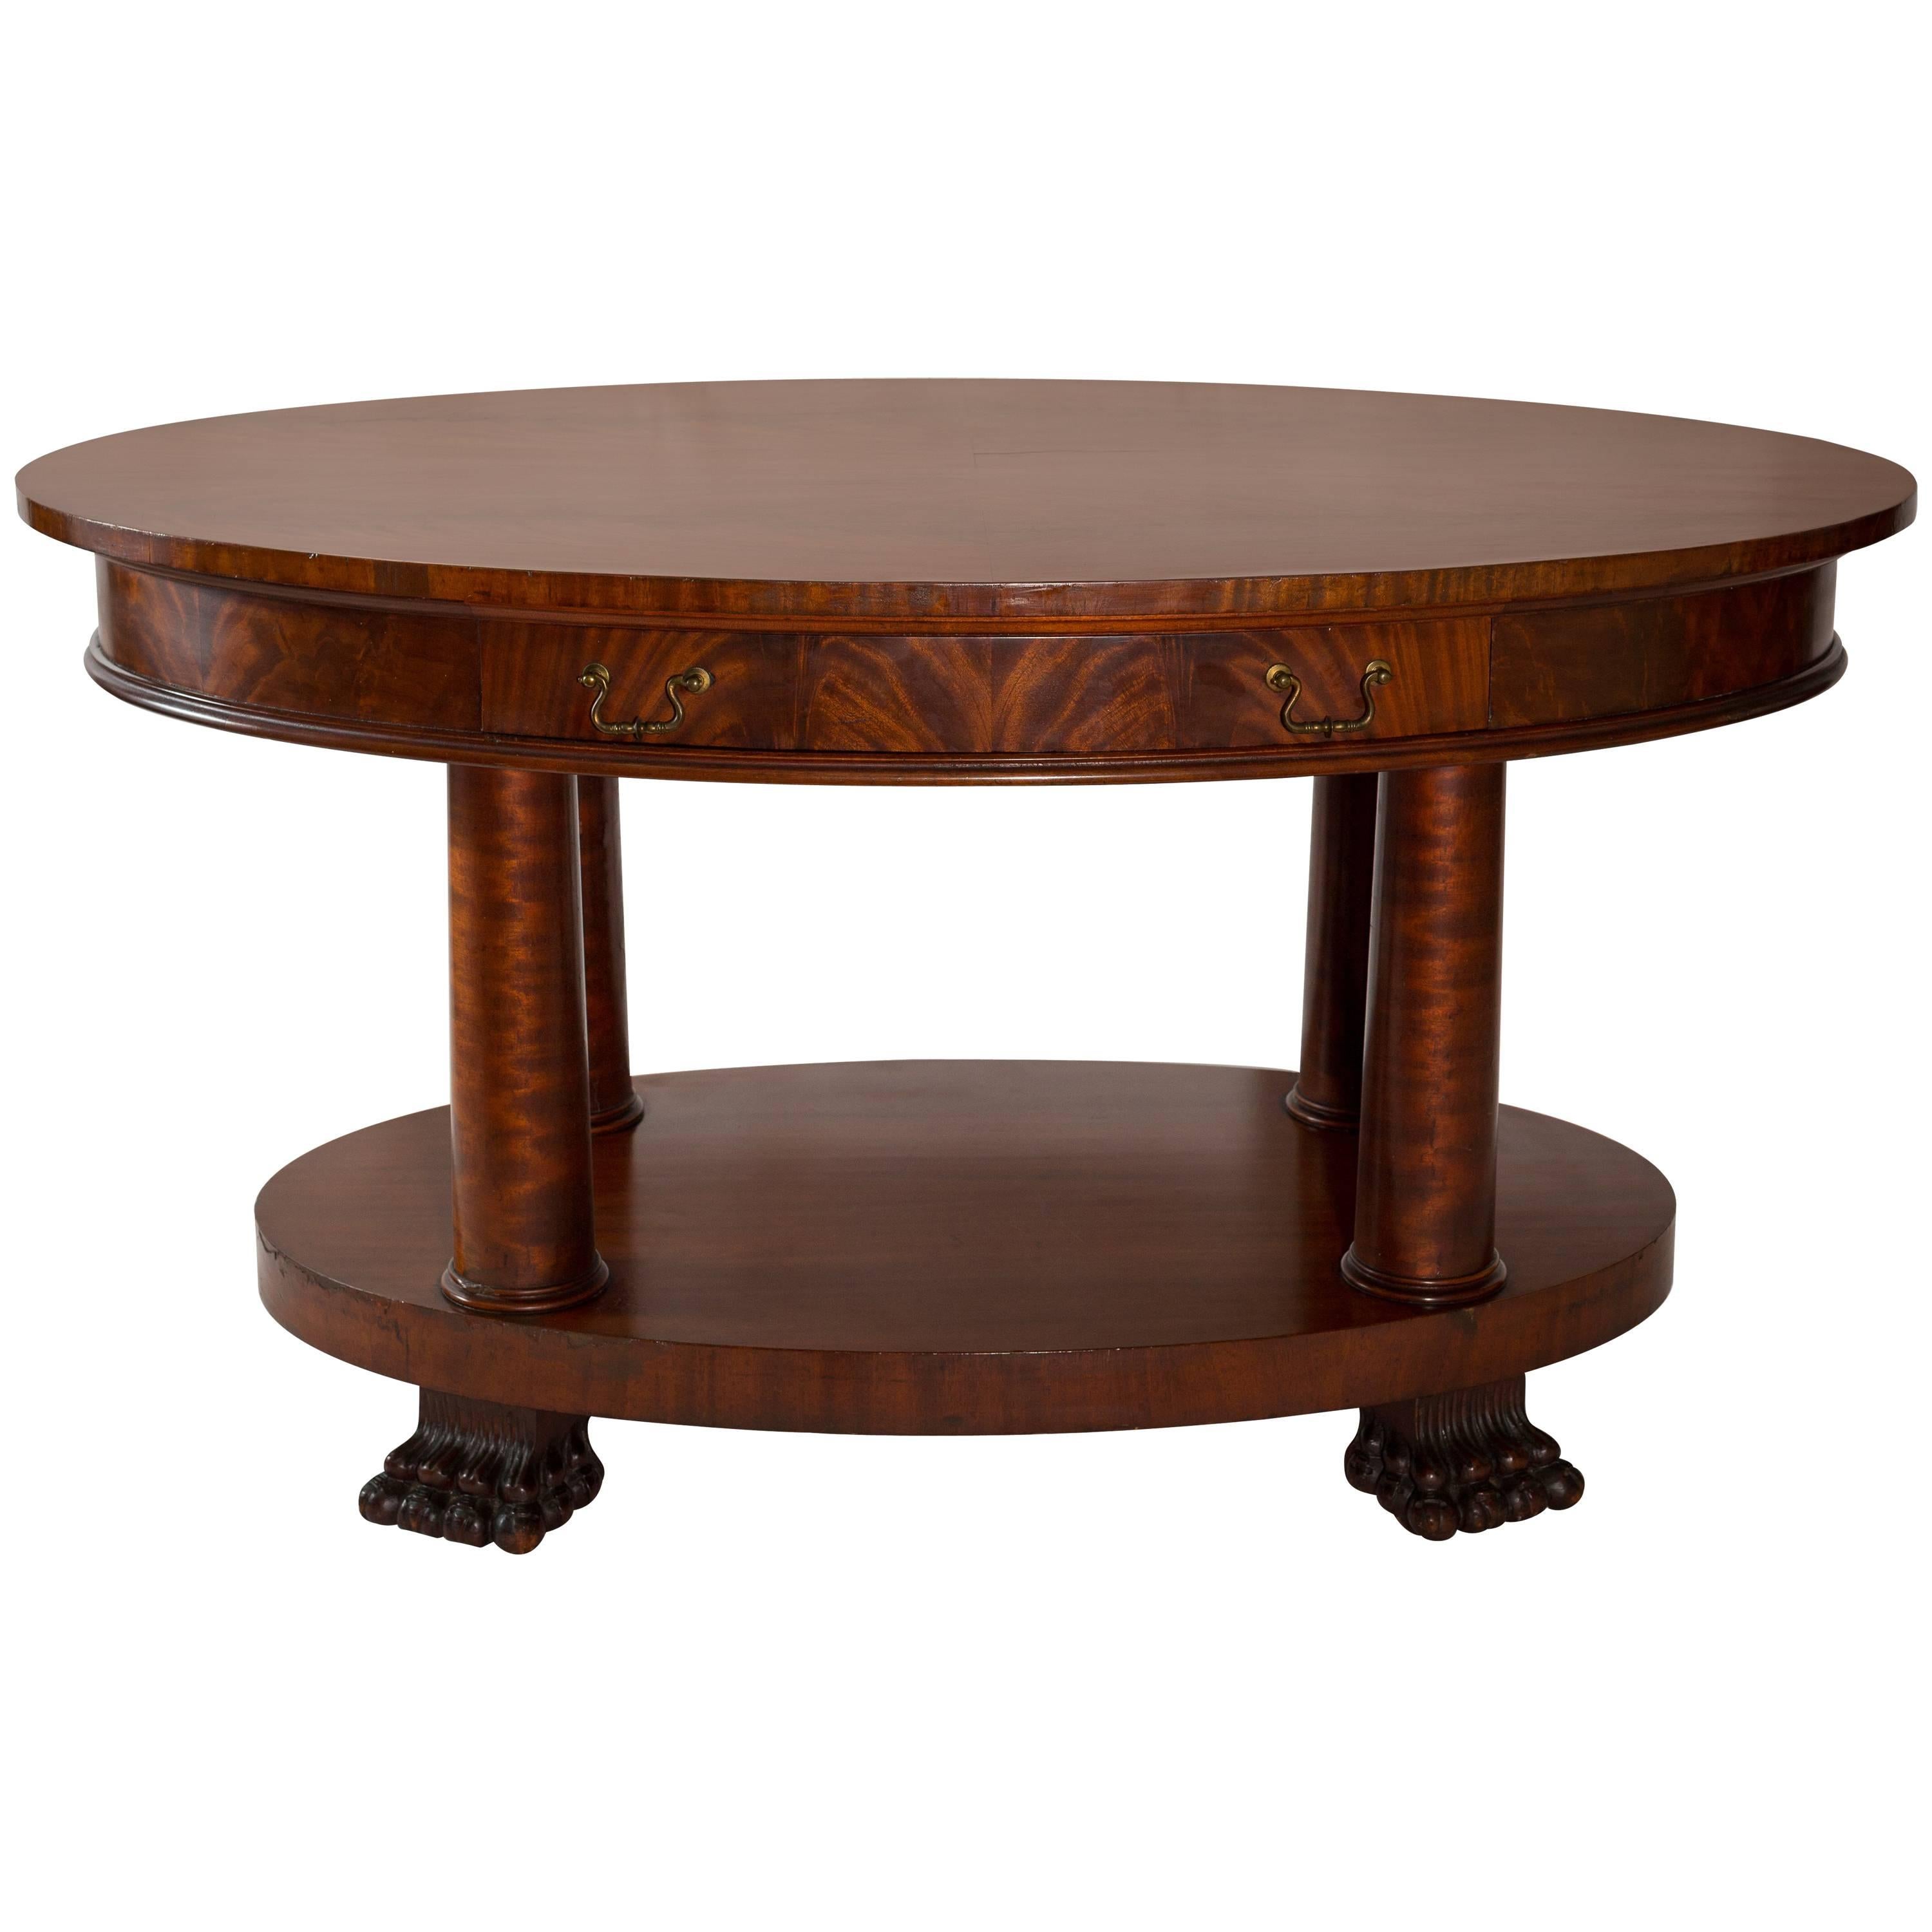 Oval American Empire Table with Claw Feet For Sale